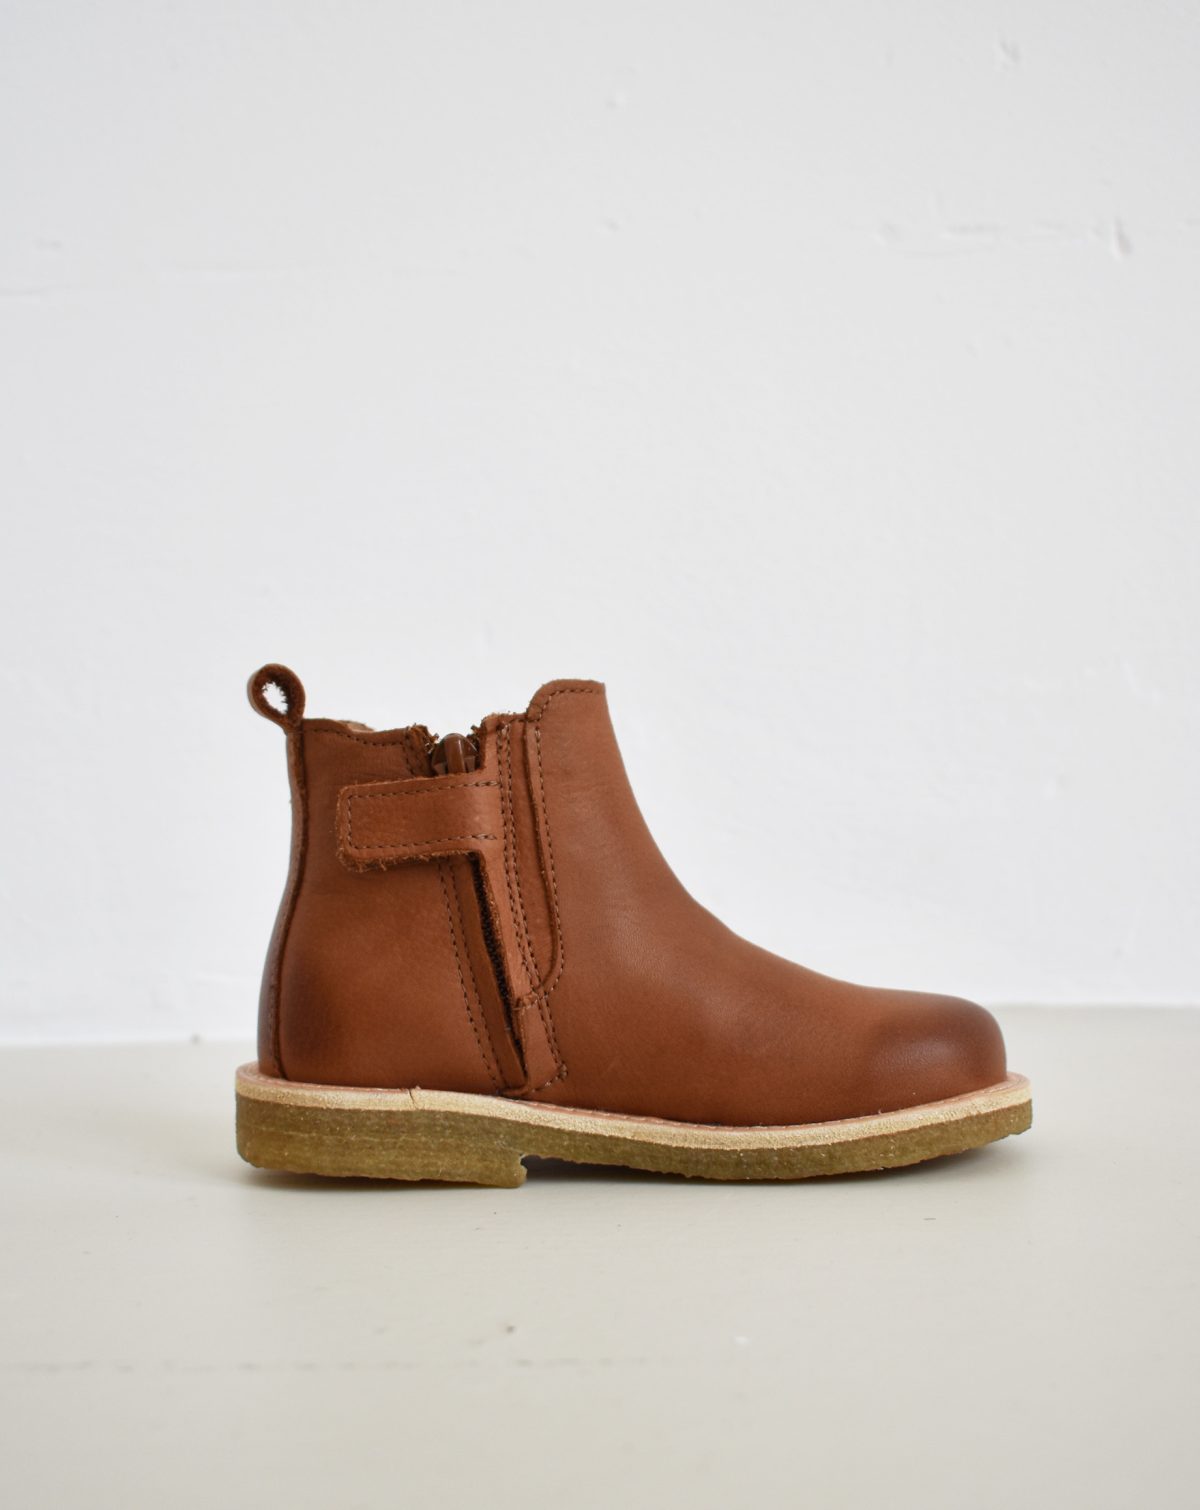 lilbobs.nl-unisex-boots-cognac-leather